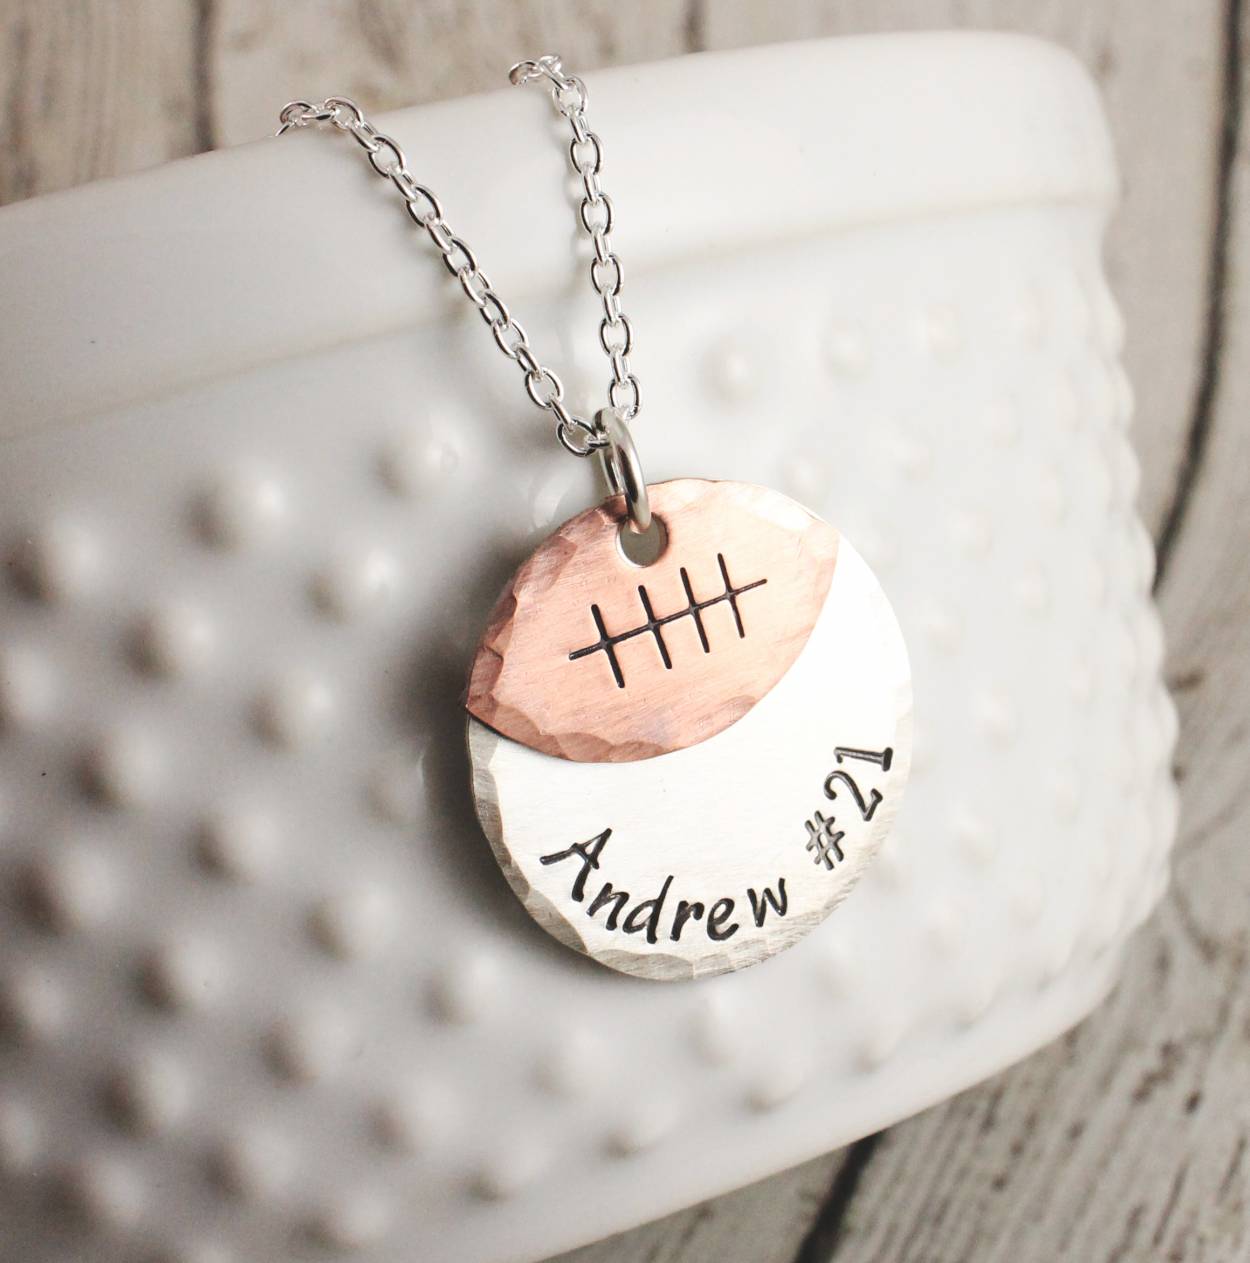 Personalized Football Necklace